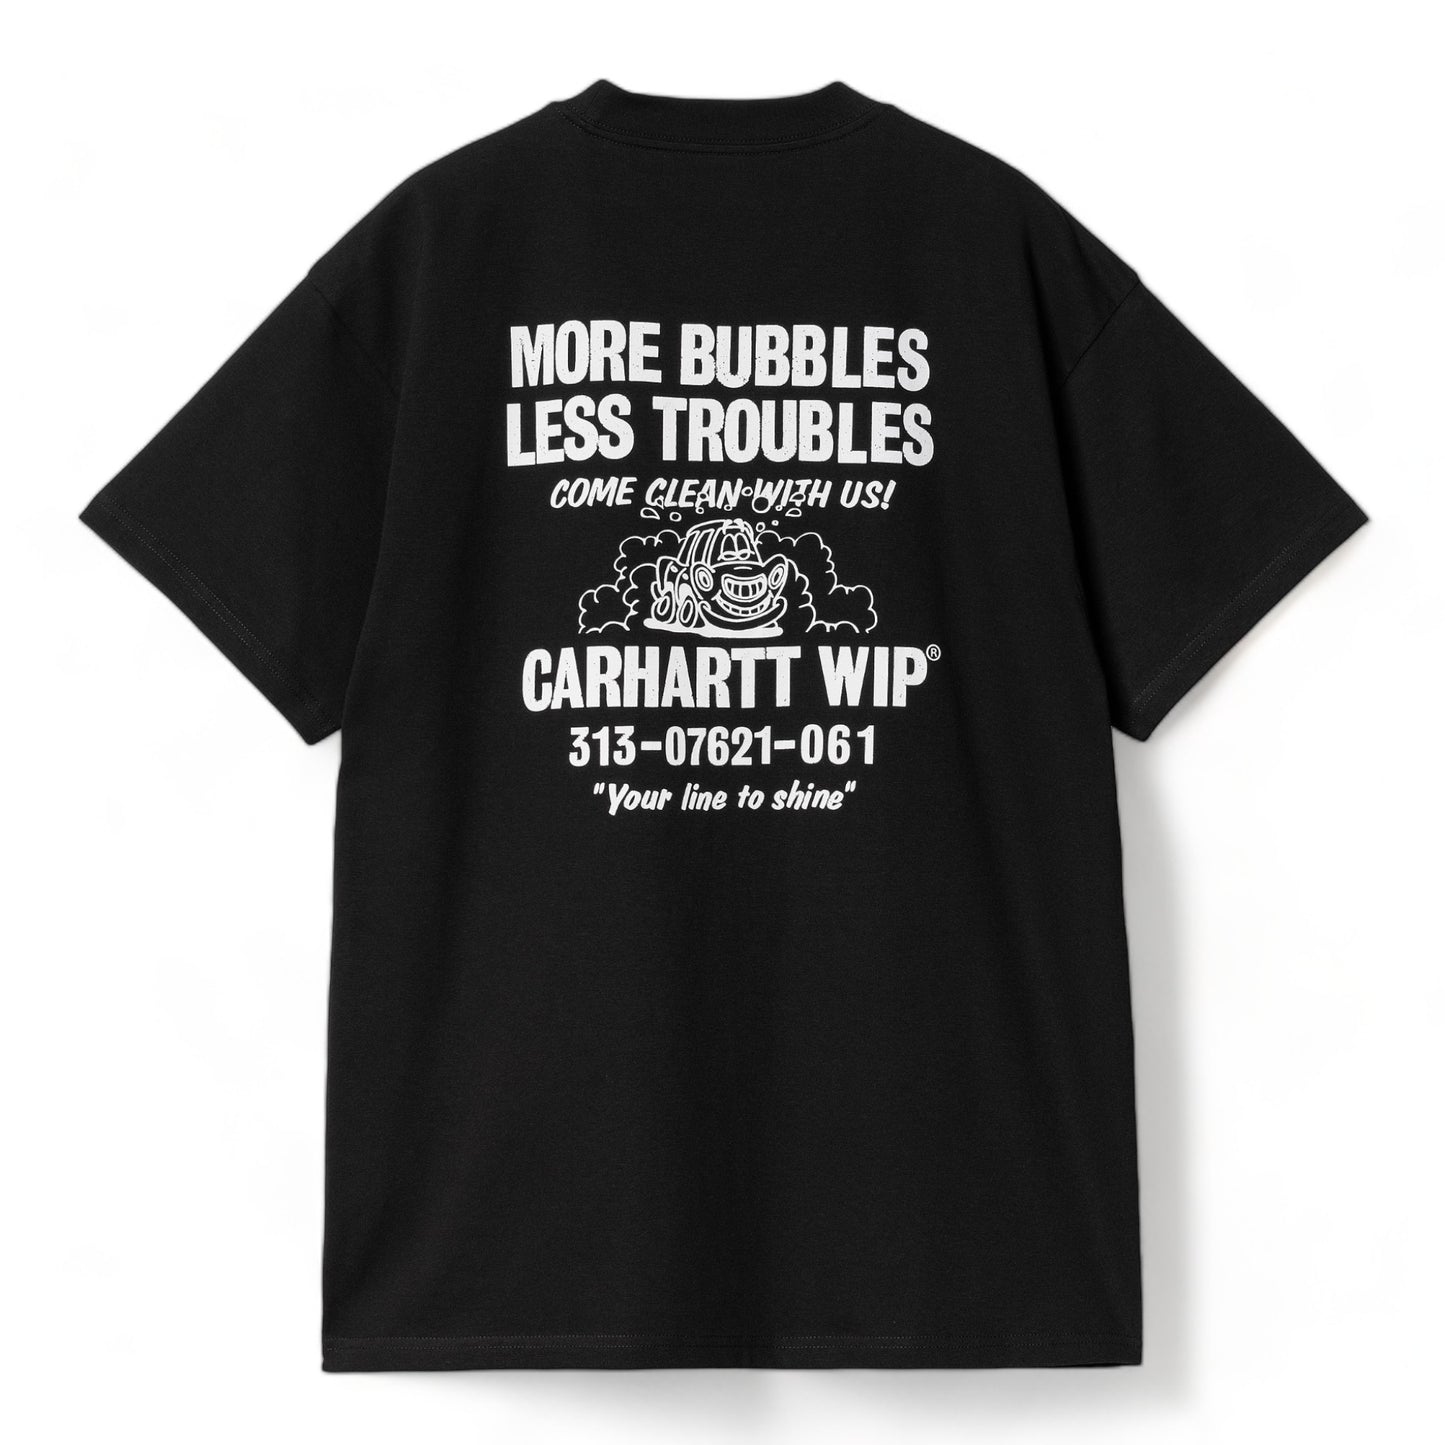 CARHARTT WIP S/S LESS TROUBLES T-SHIRT